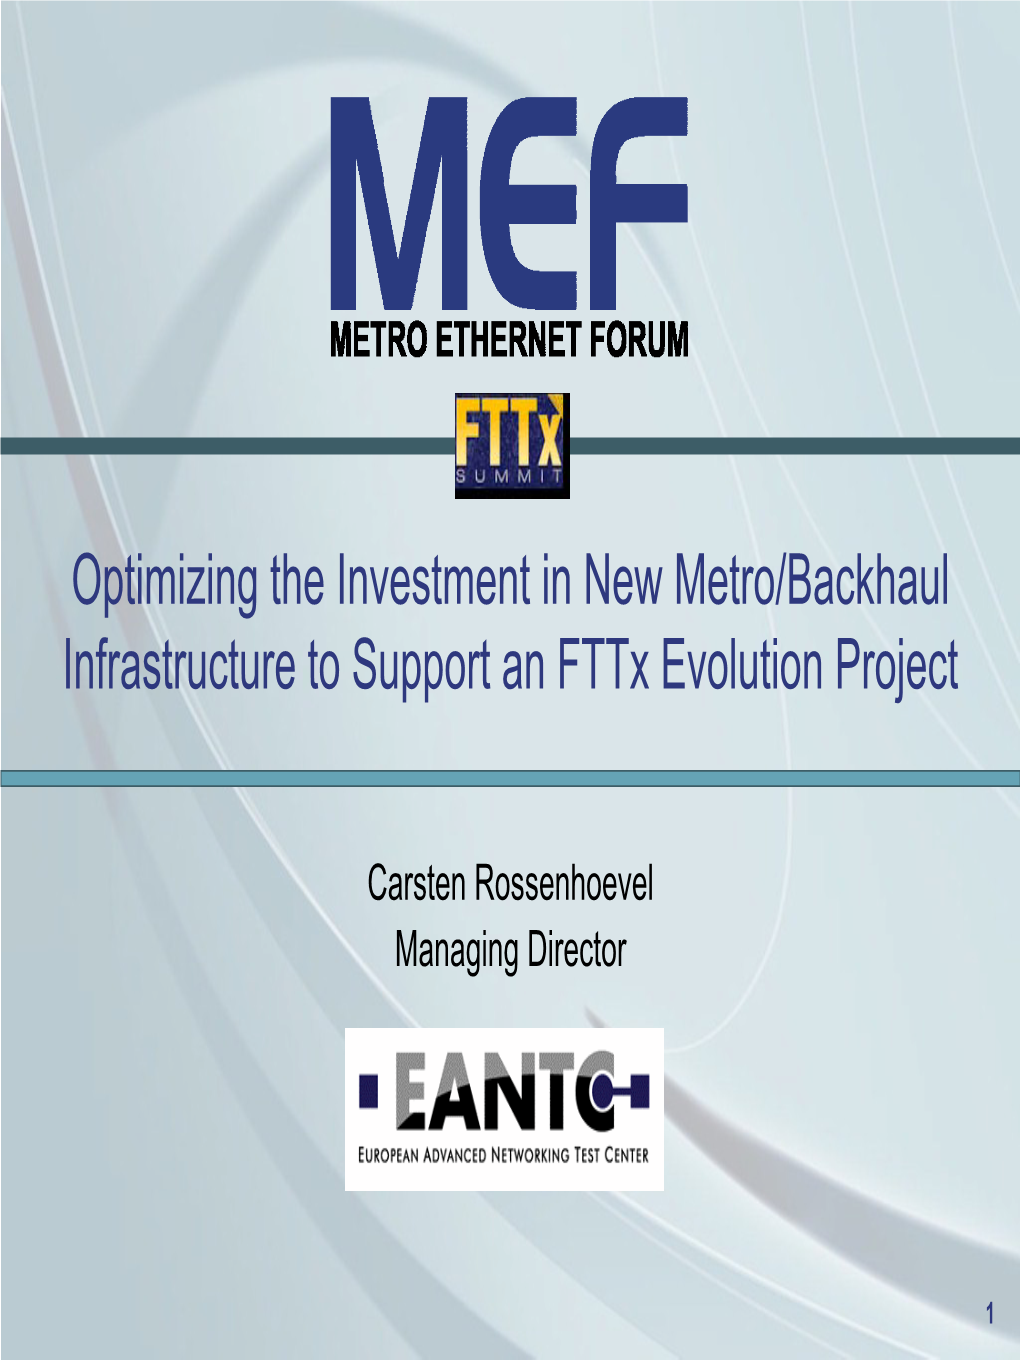 Optimizing the Investment in New Metro/Backhaul Infrastructure to Support an Fttx Evolution Project